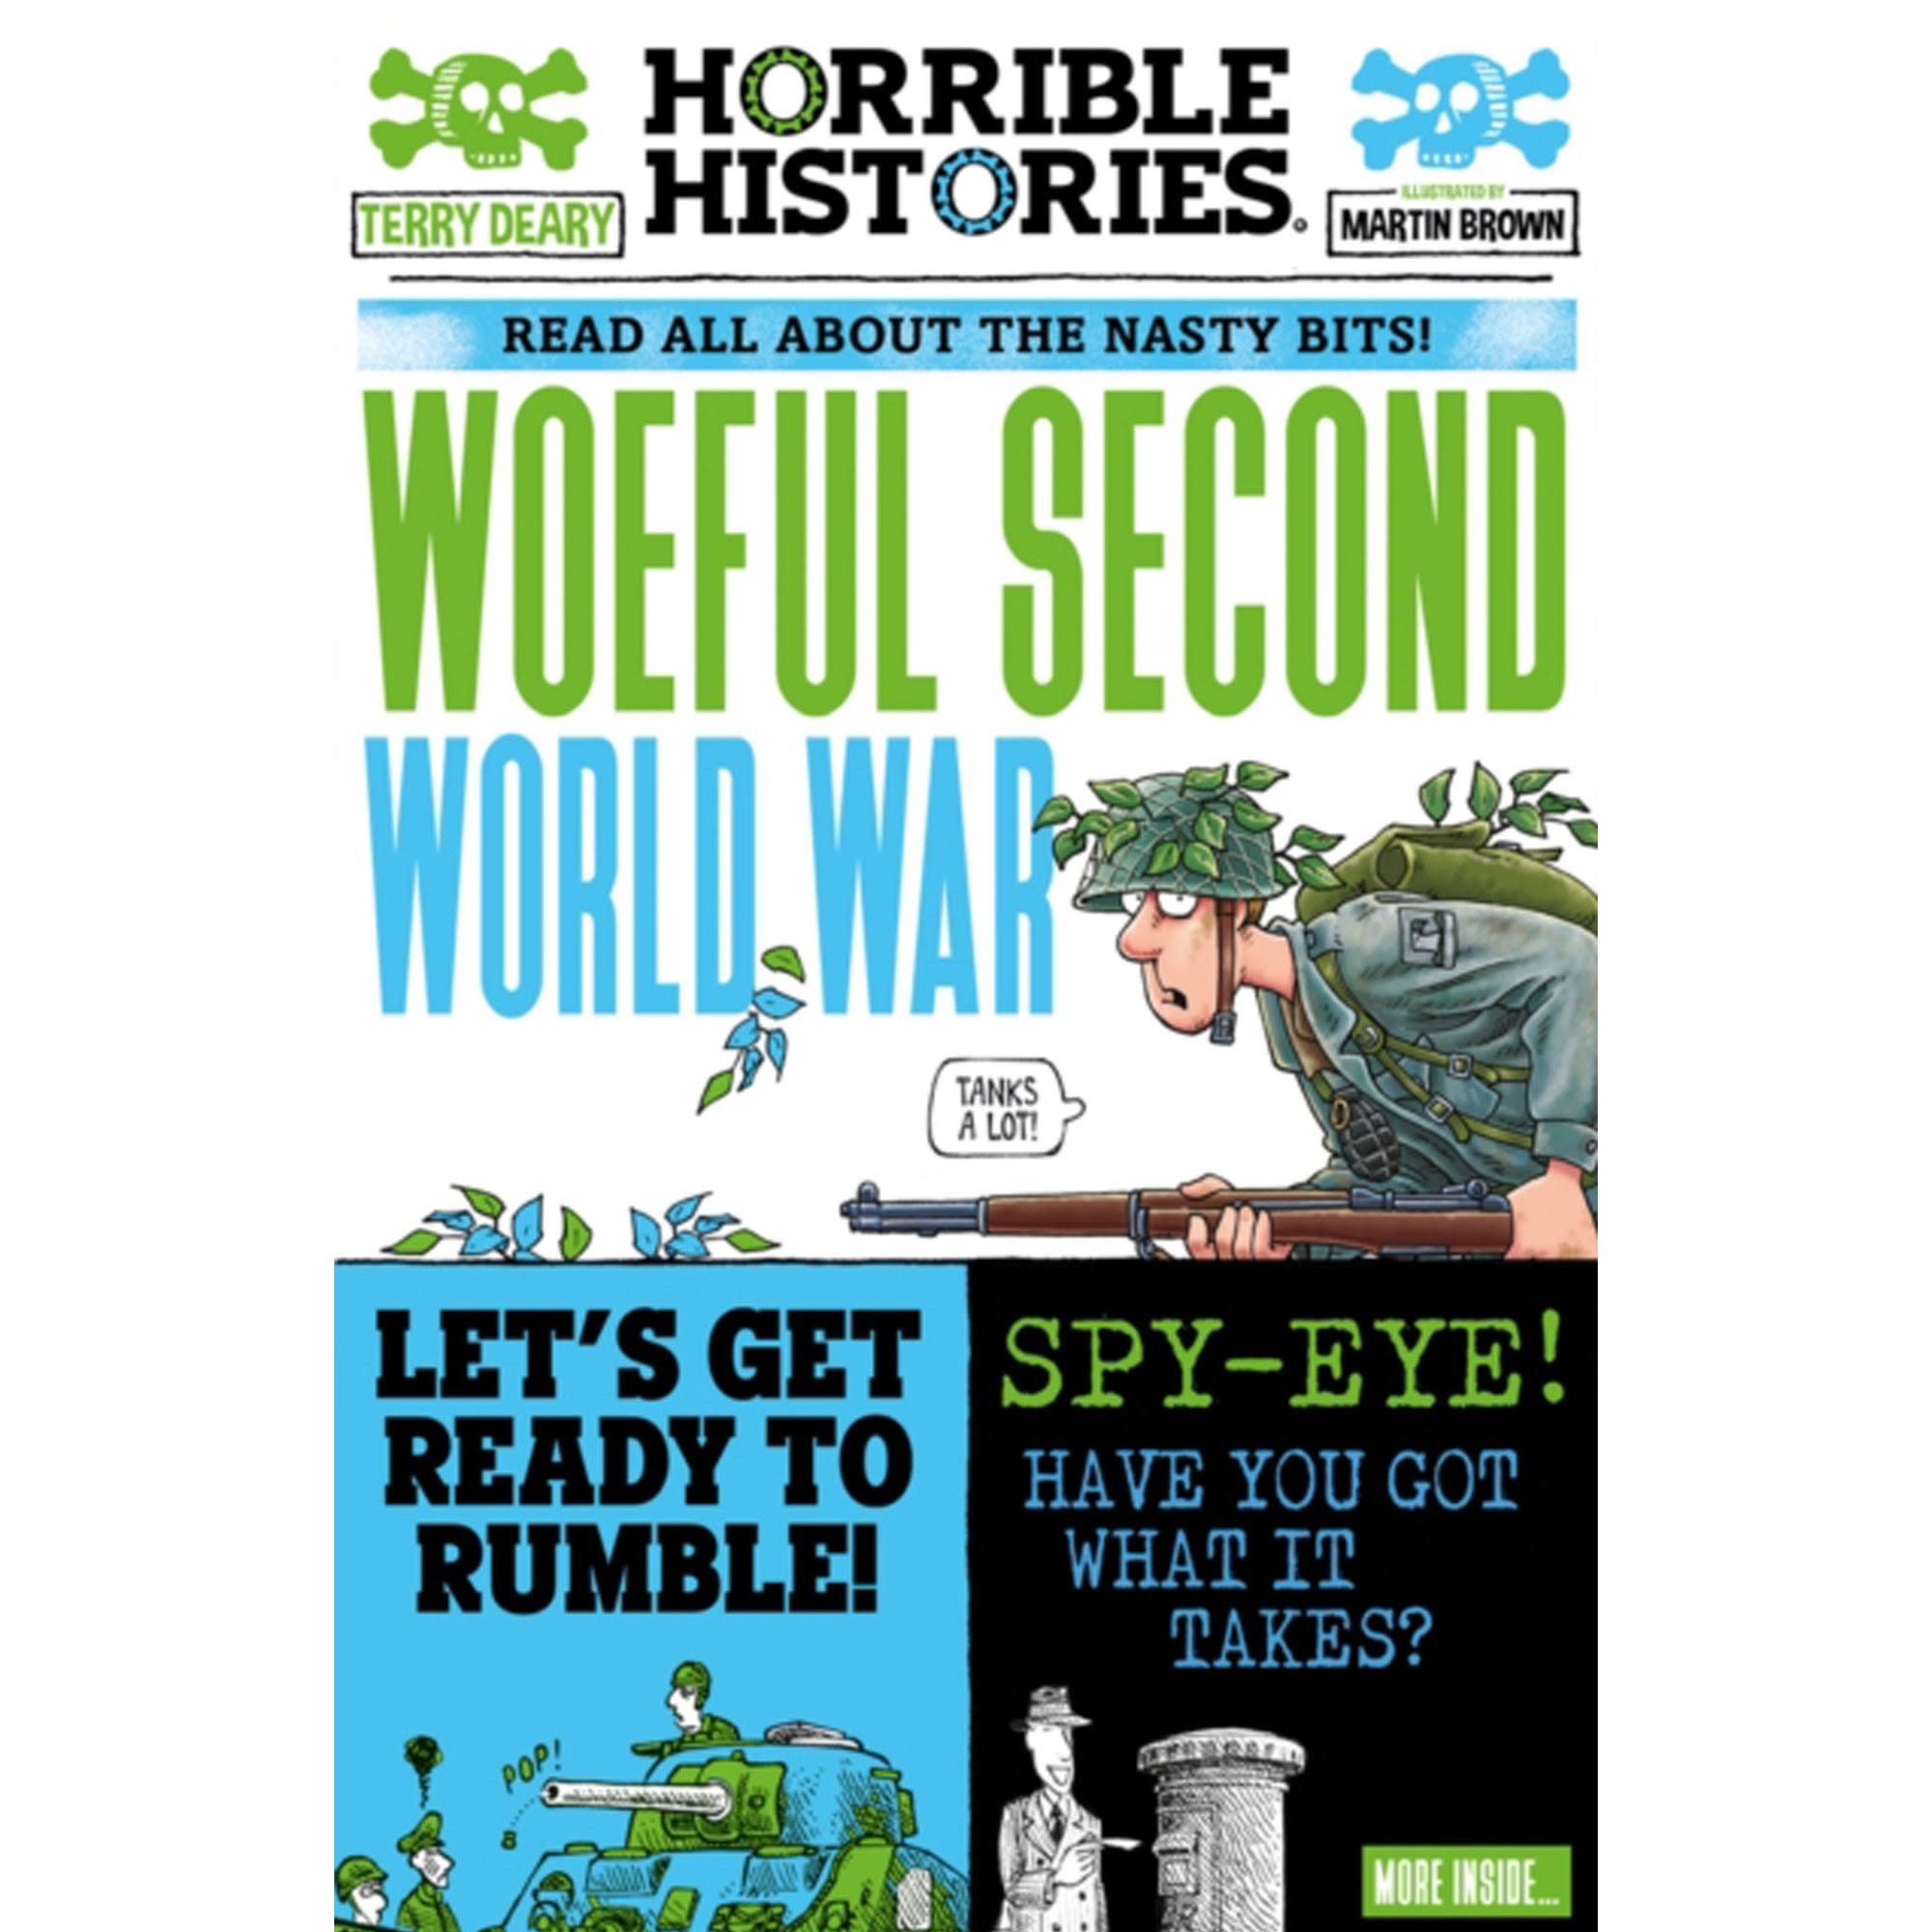 Woeful Second World War by Terry Deary